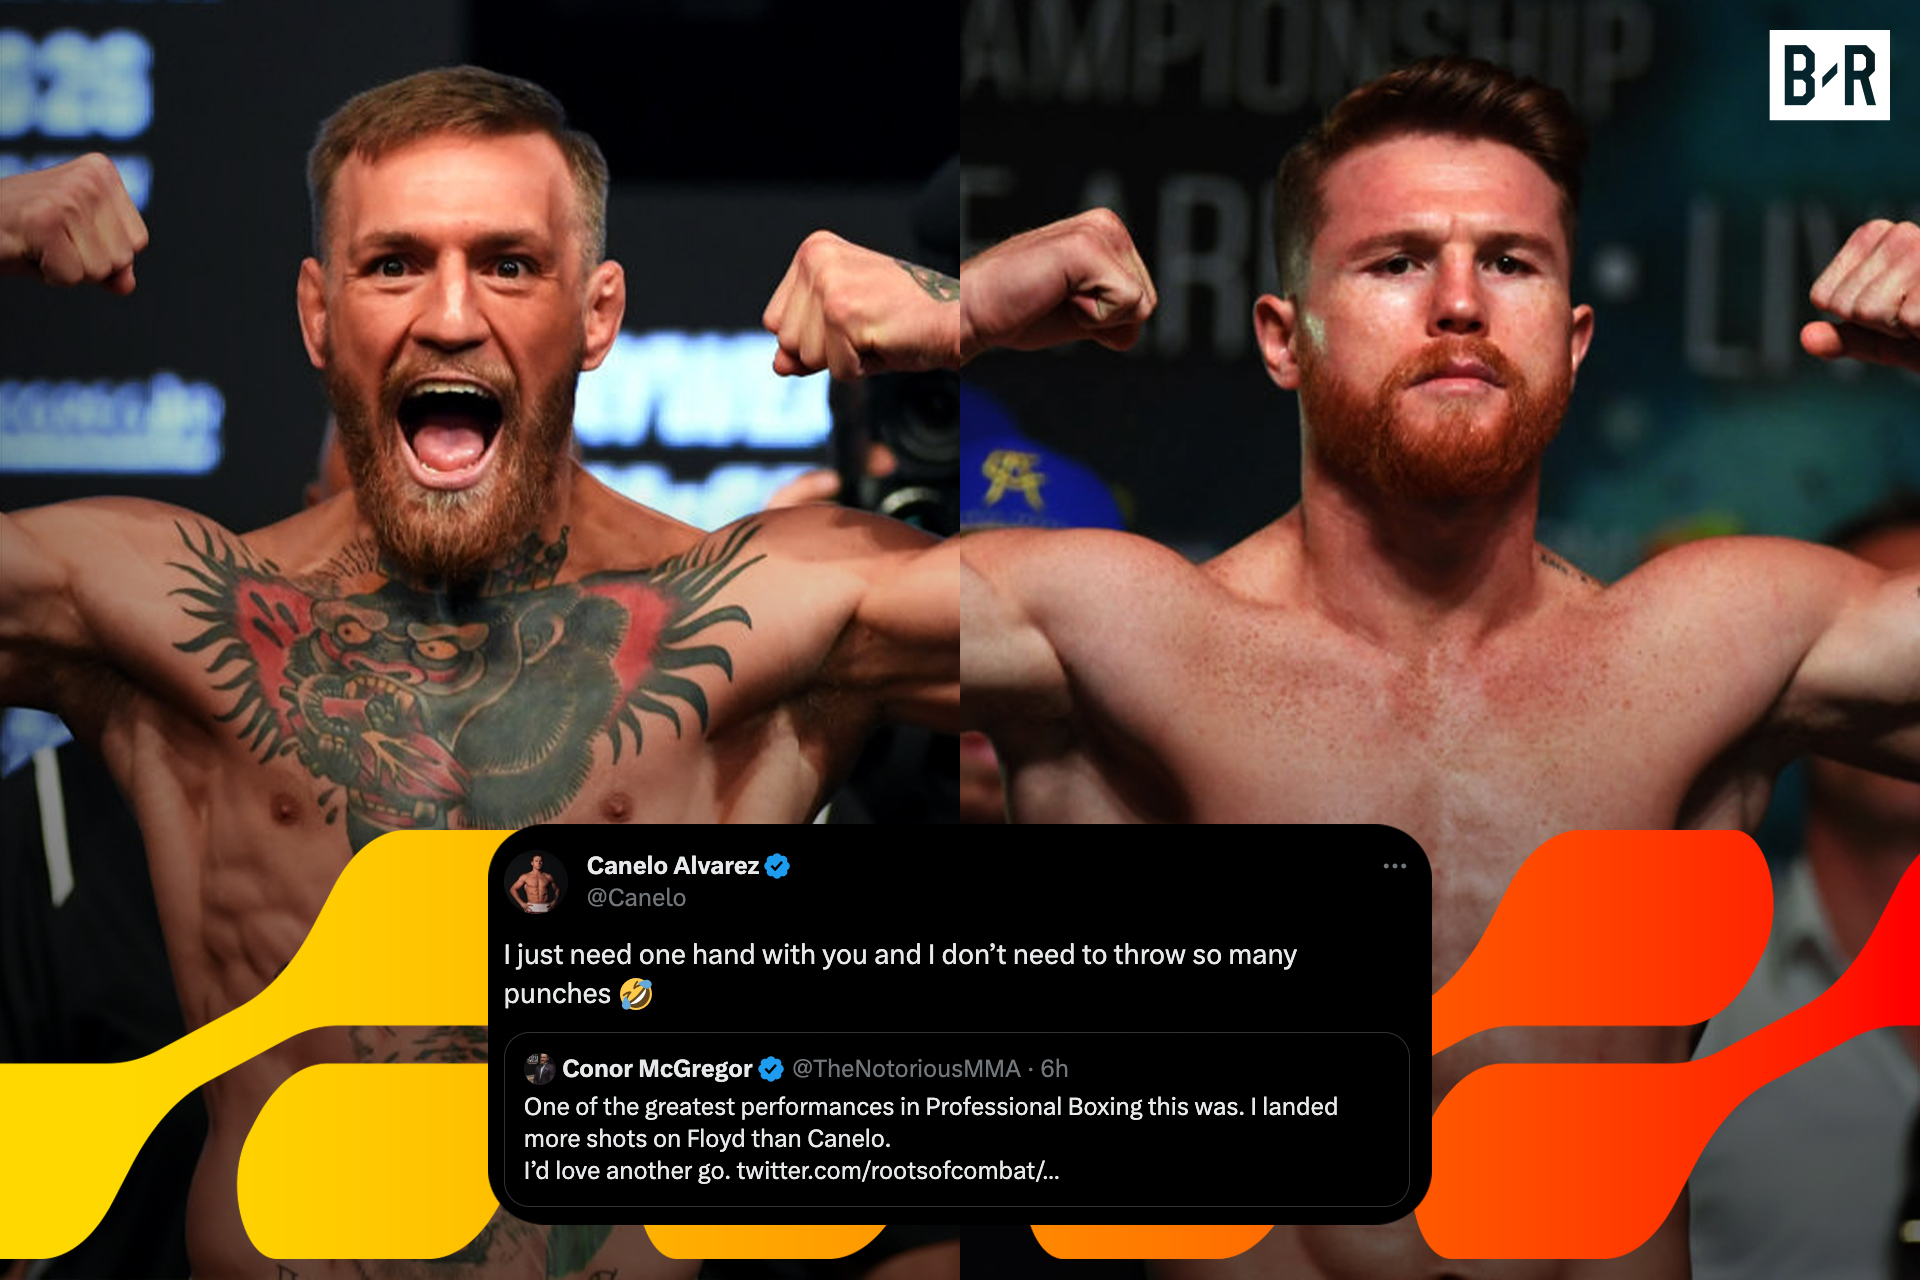 Conor McGregor talks to Carnelo about canelo vs Ryder